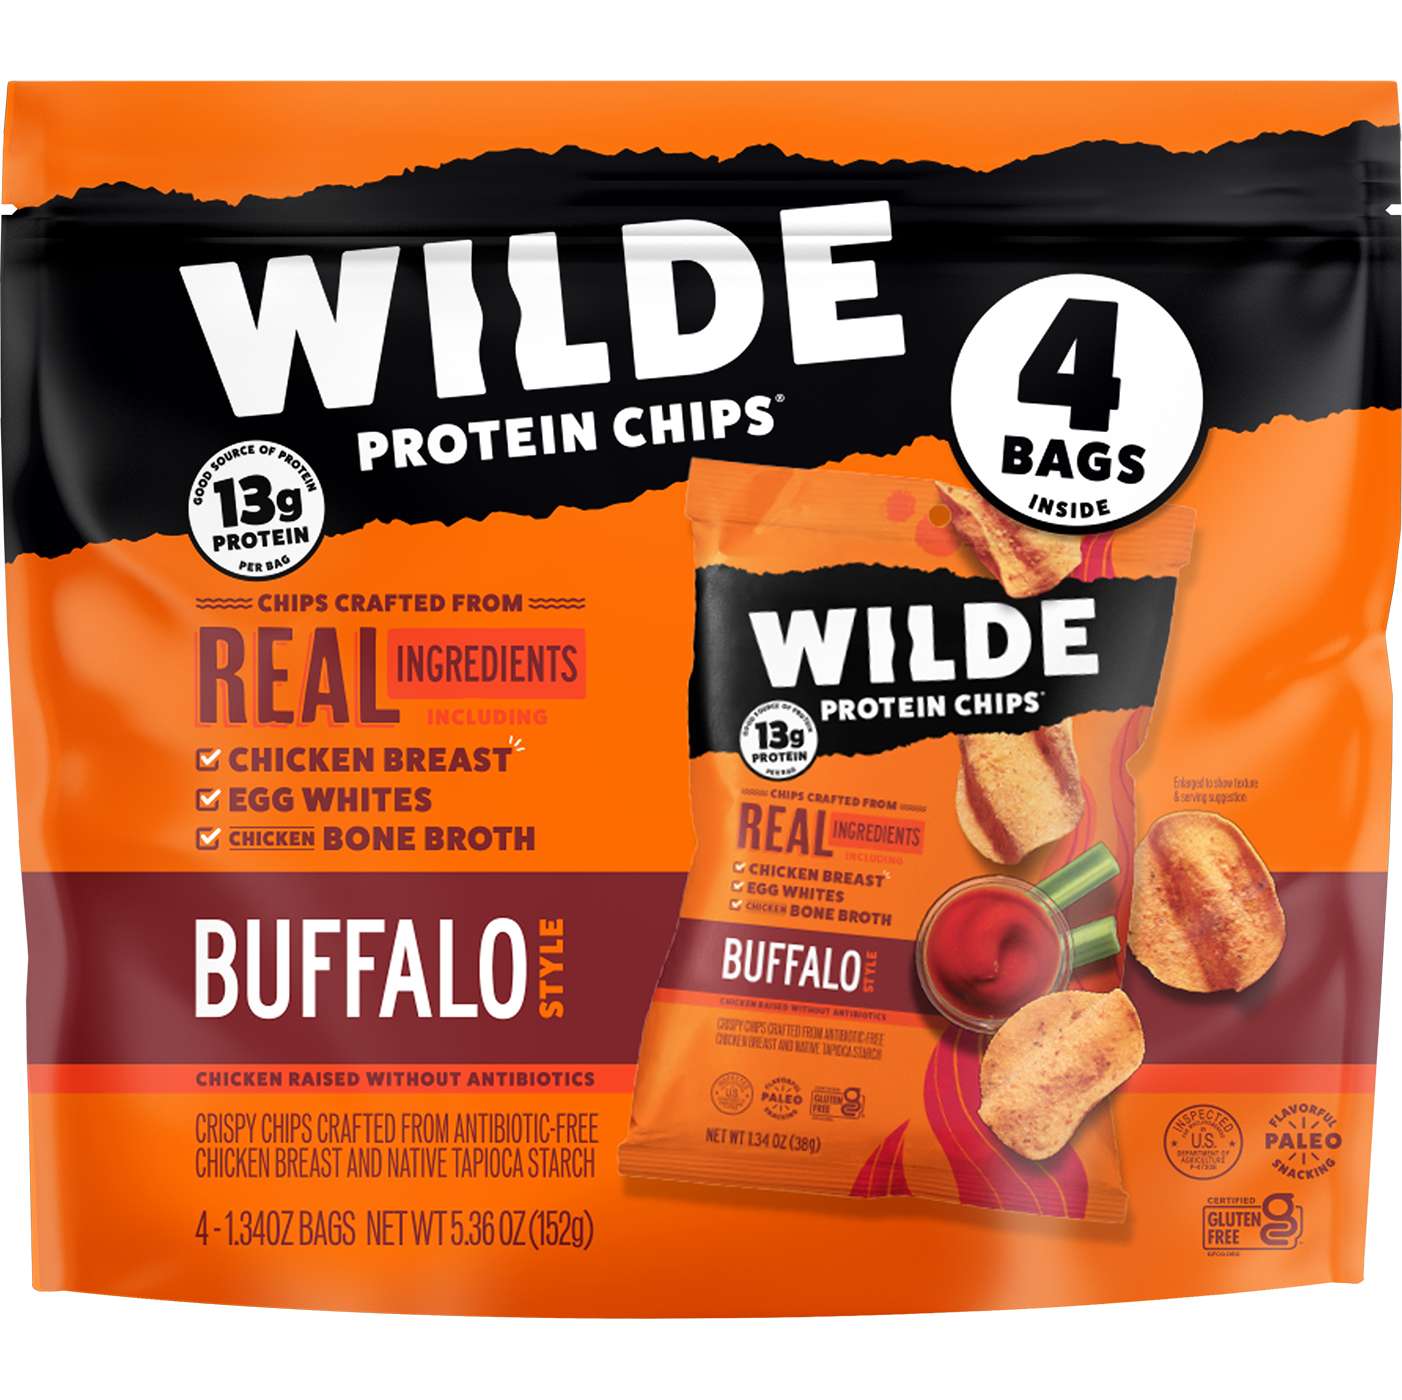 WILDE Protein Chips 4 pk Bags - Buffalo; image 1 of 2